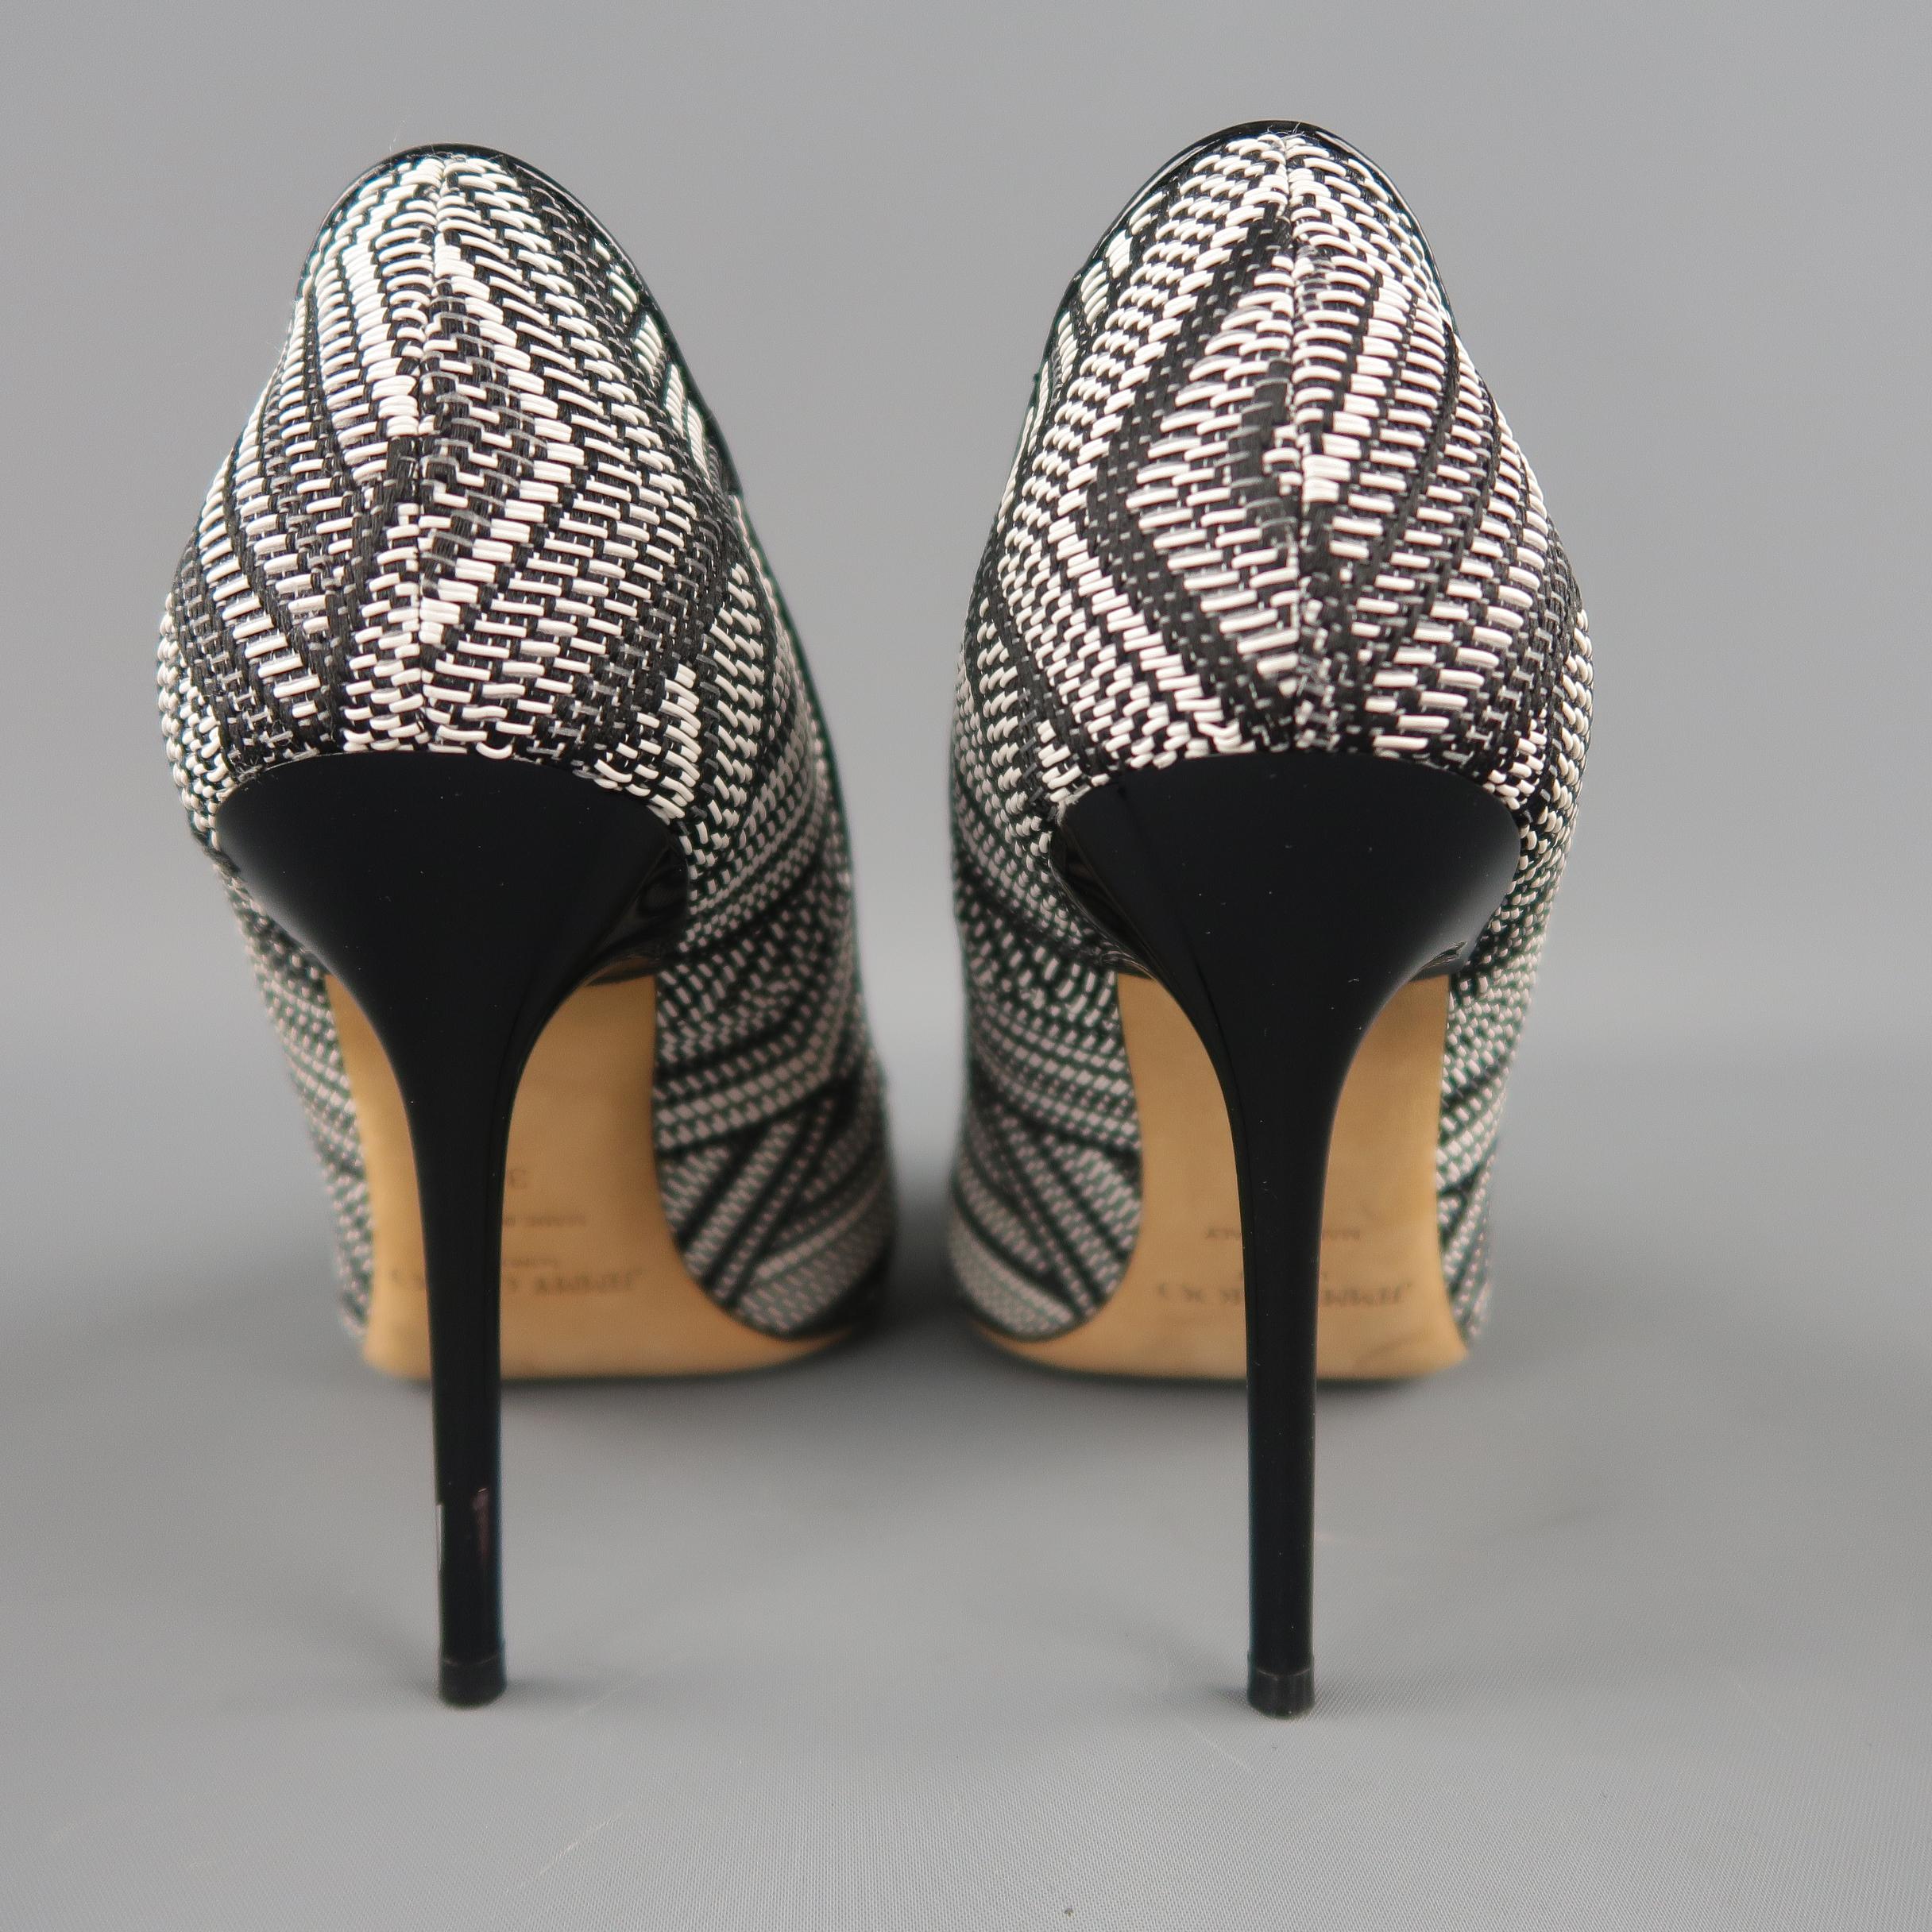 JIMMY CHOO Size 9 Black & White Woven Fabric ABEL Pointed Pumps 3